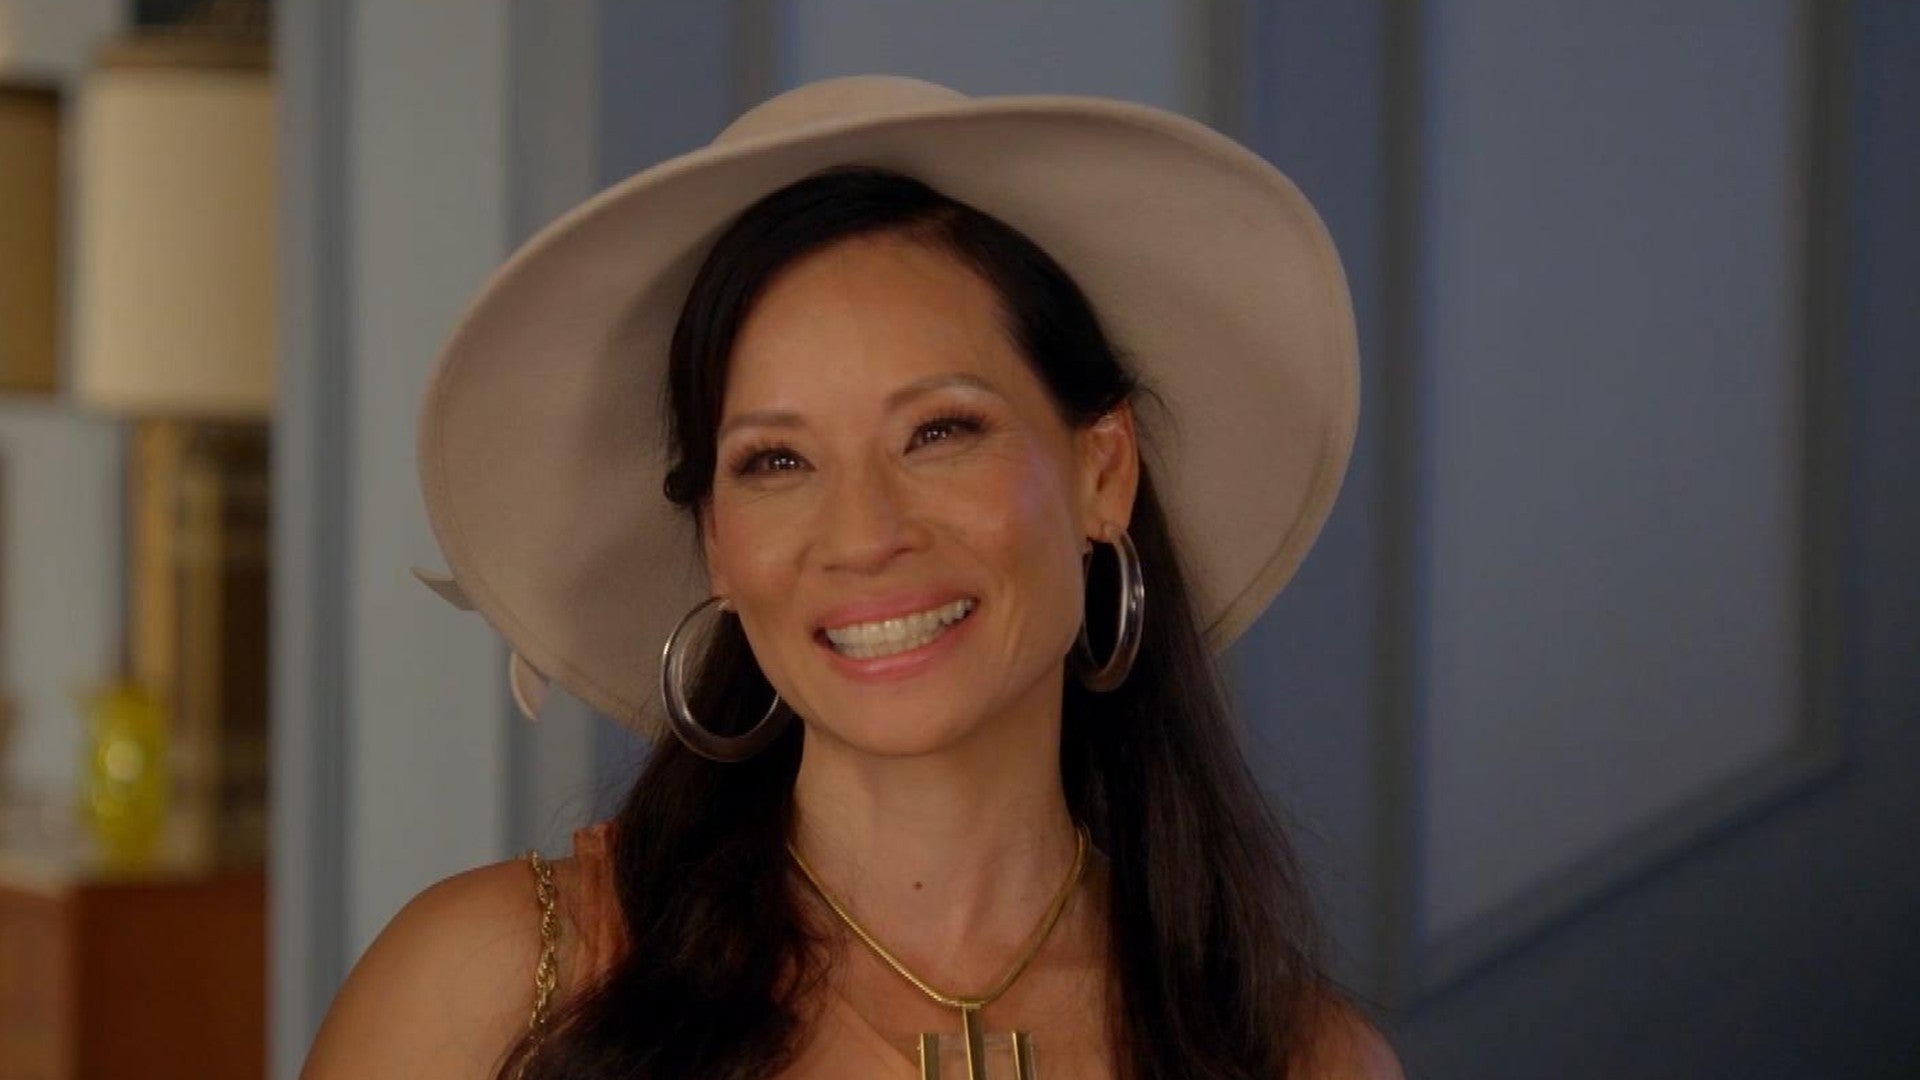 5 reasons why we're excited for Why Women Kill starring Lucy Liu